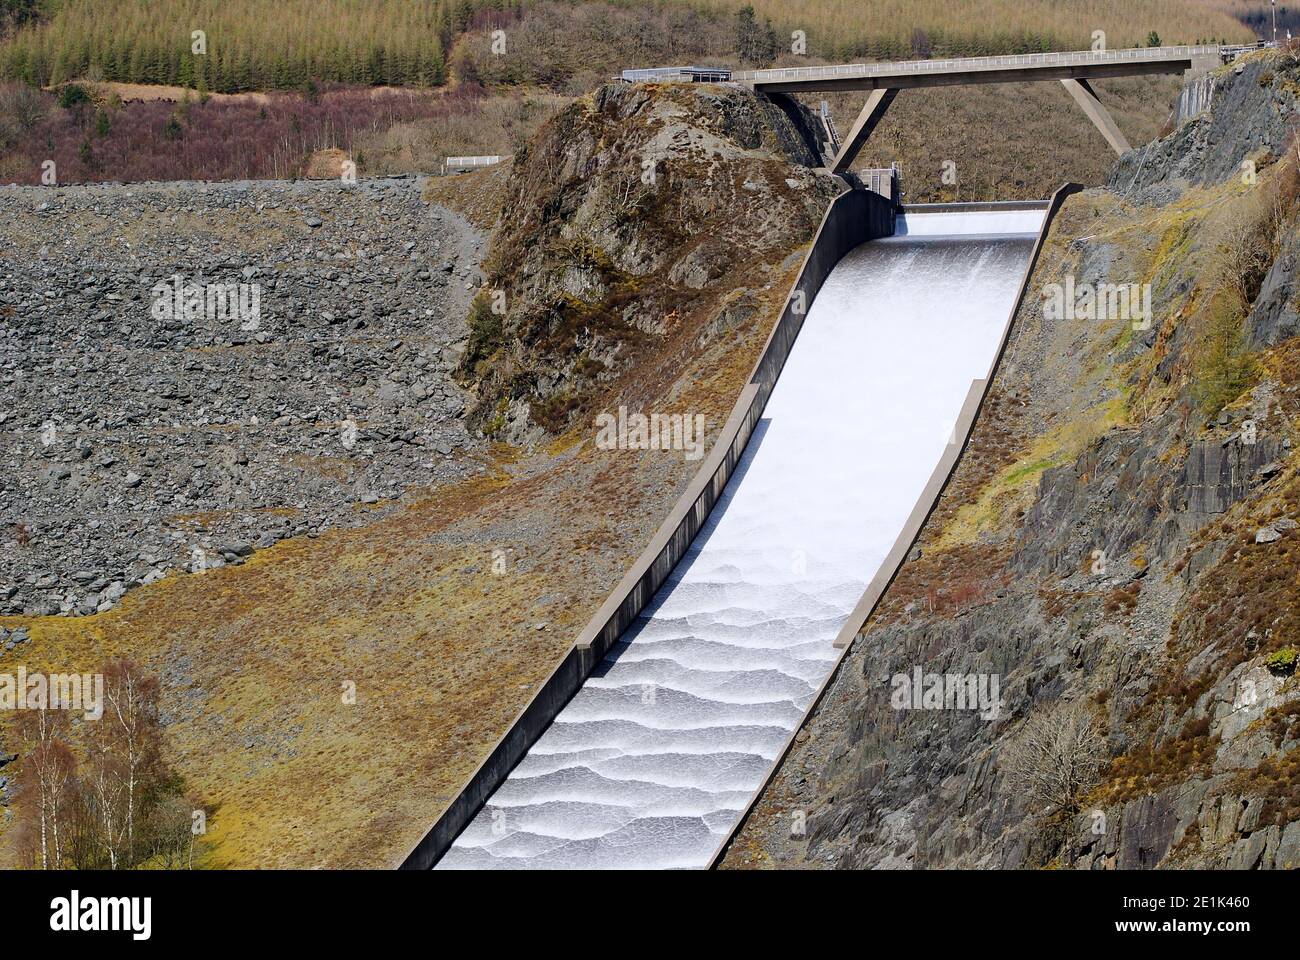 Silvery fast flowing water spill from reservoir Stock Photo